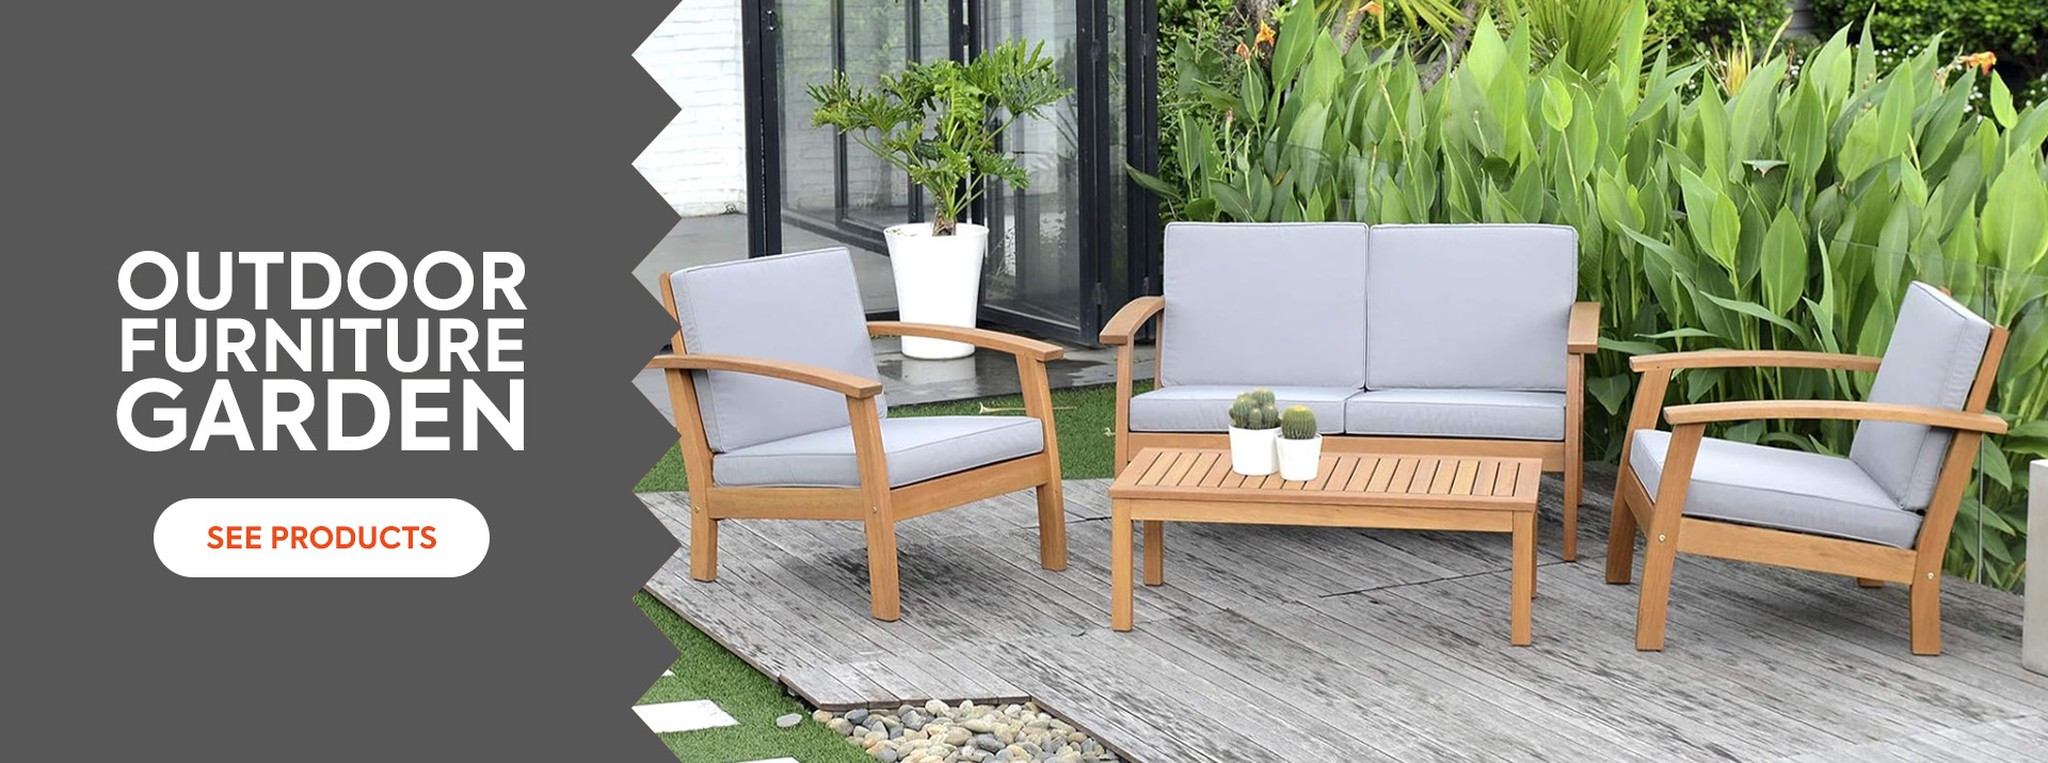 Discover our collection of garden furniture to enjoy your home this summer